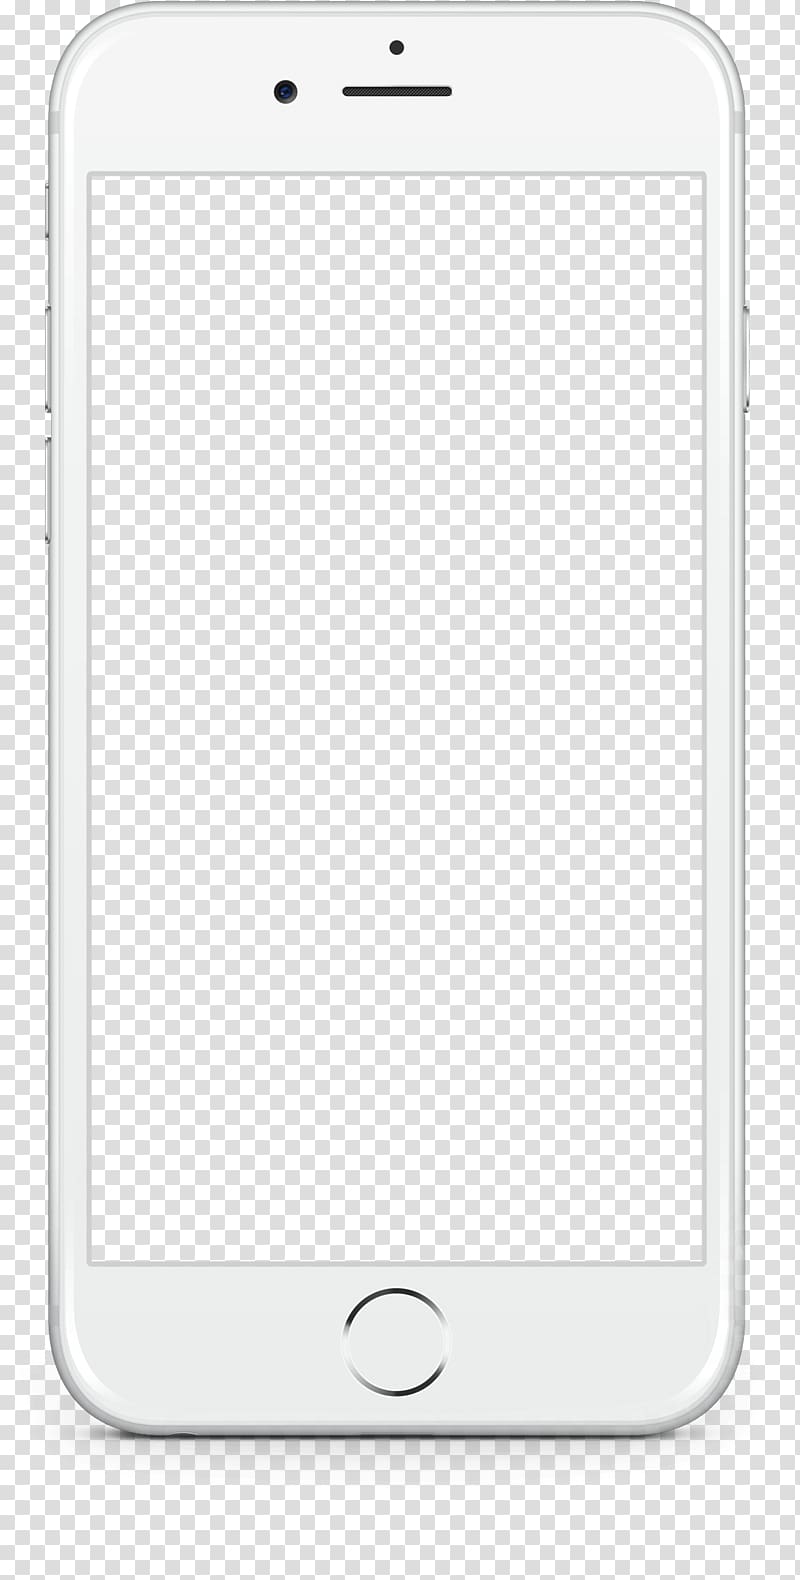 iPhone digitizer , iPhone 6 Smartphone, Iphone transparent background PNG clipart